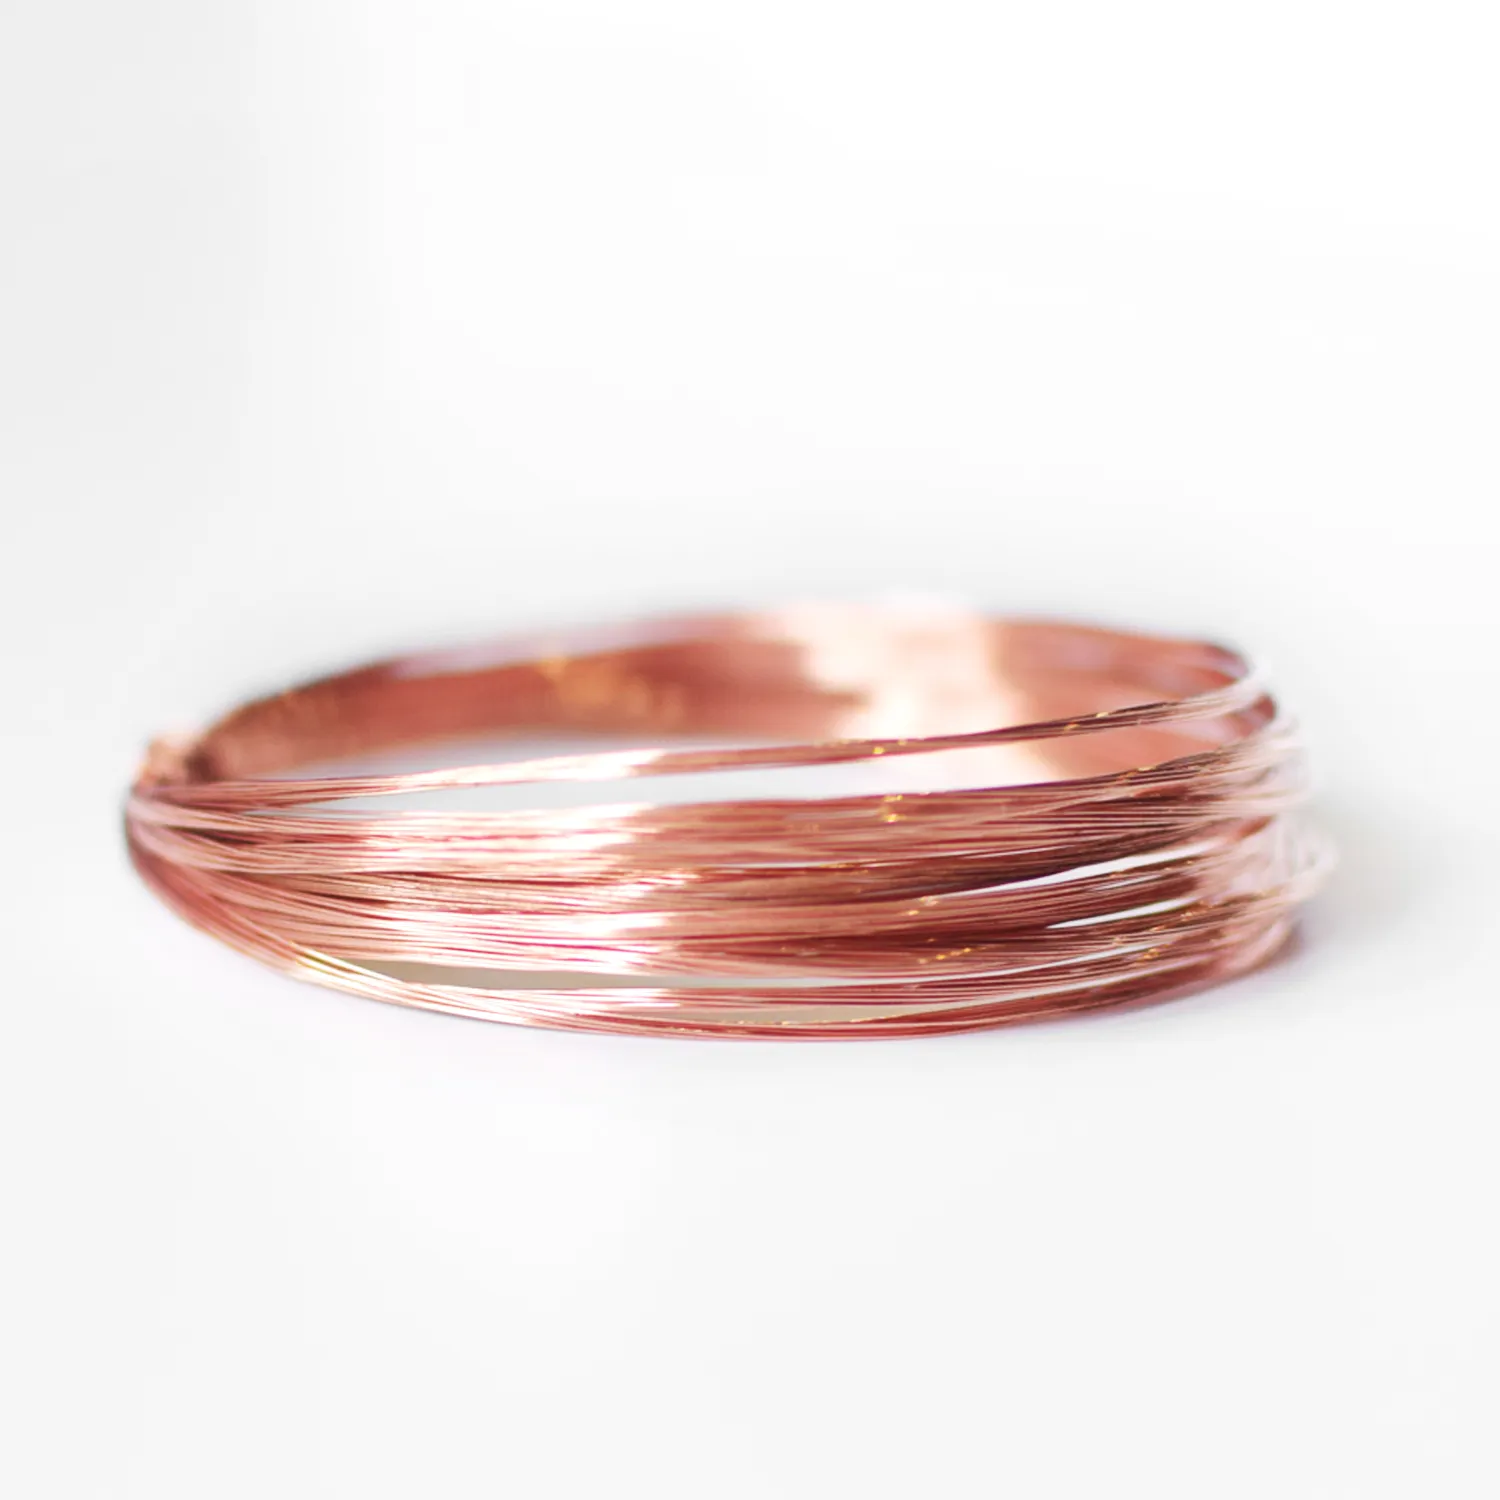 Annealed Copper Wire (2.6mm)